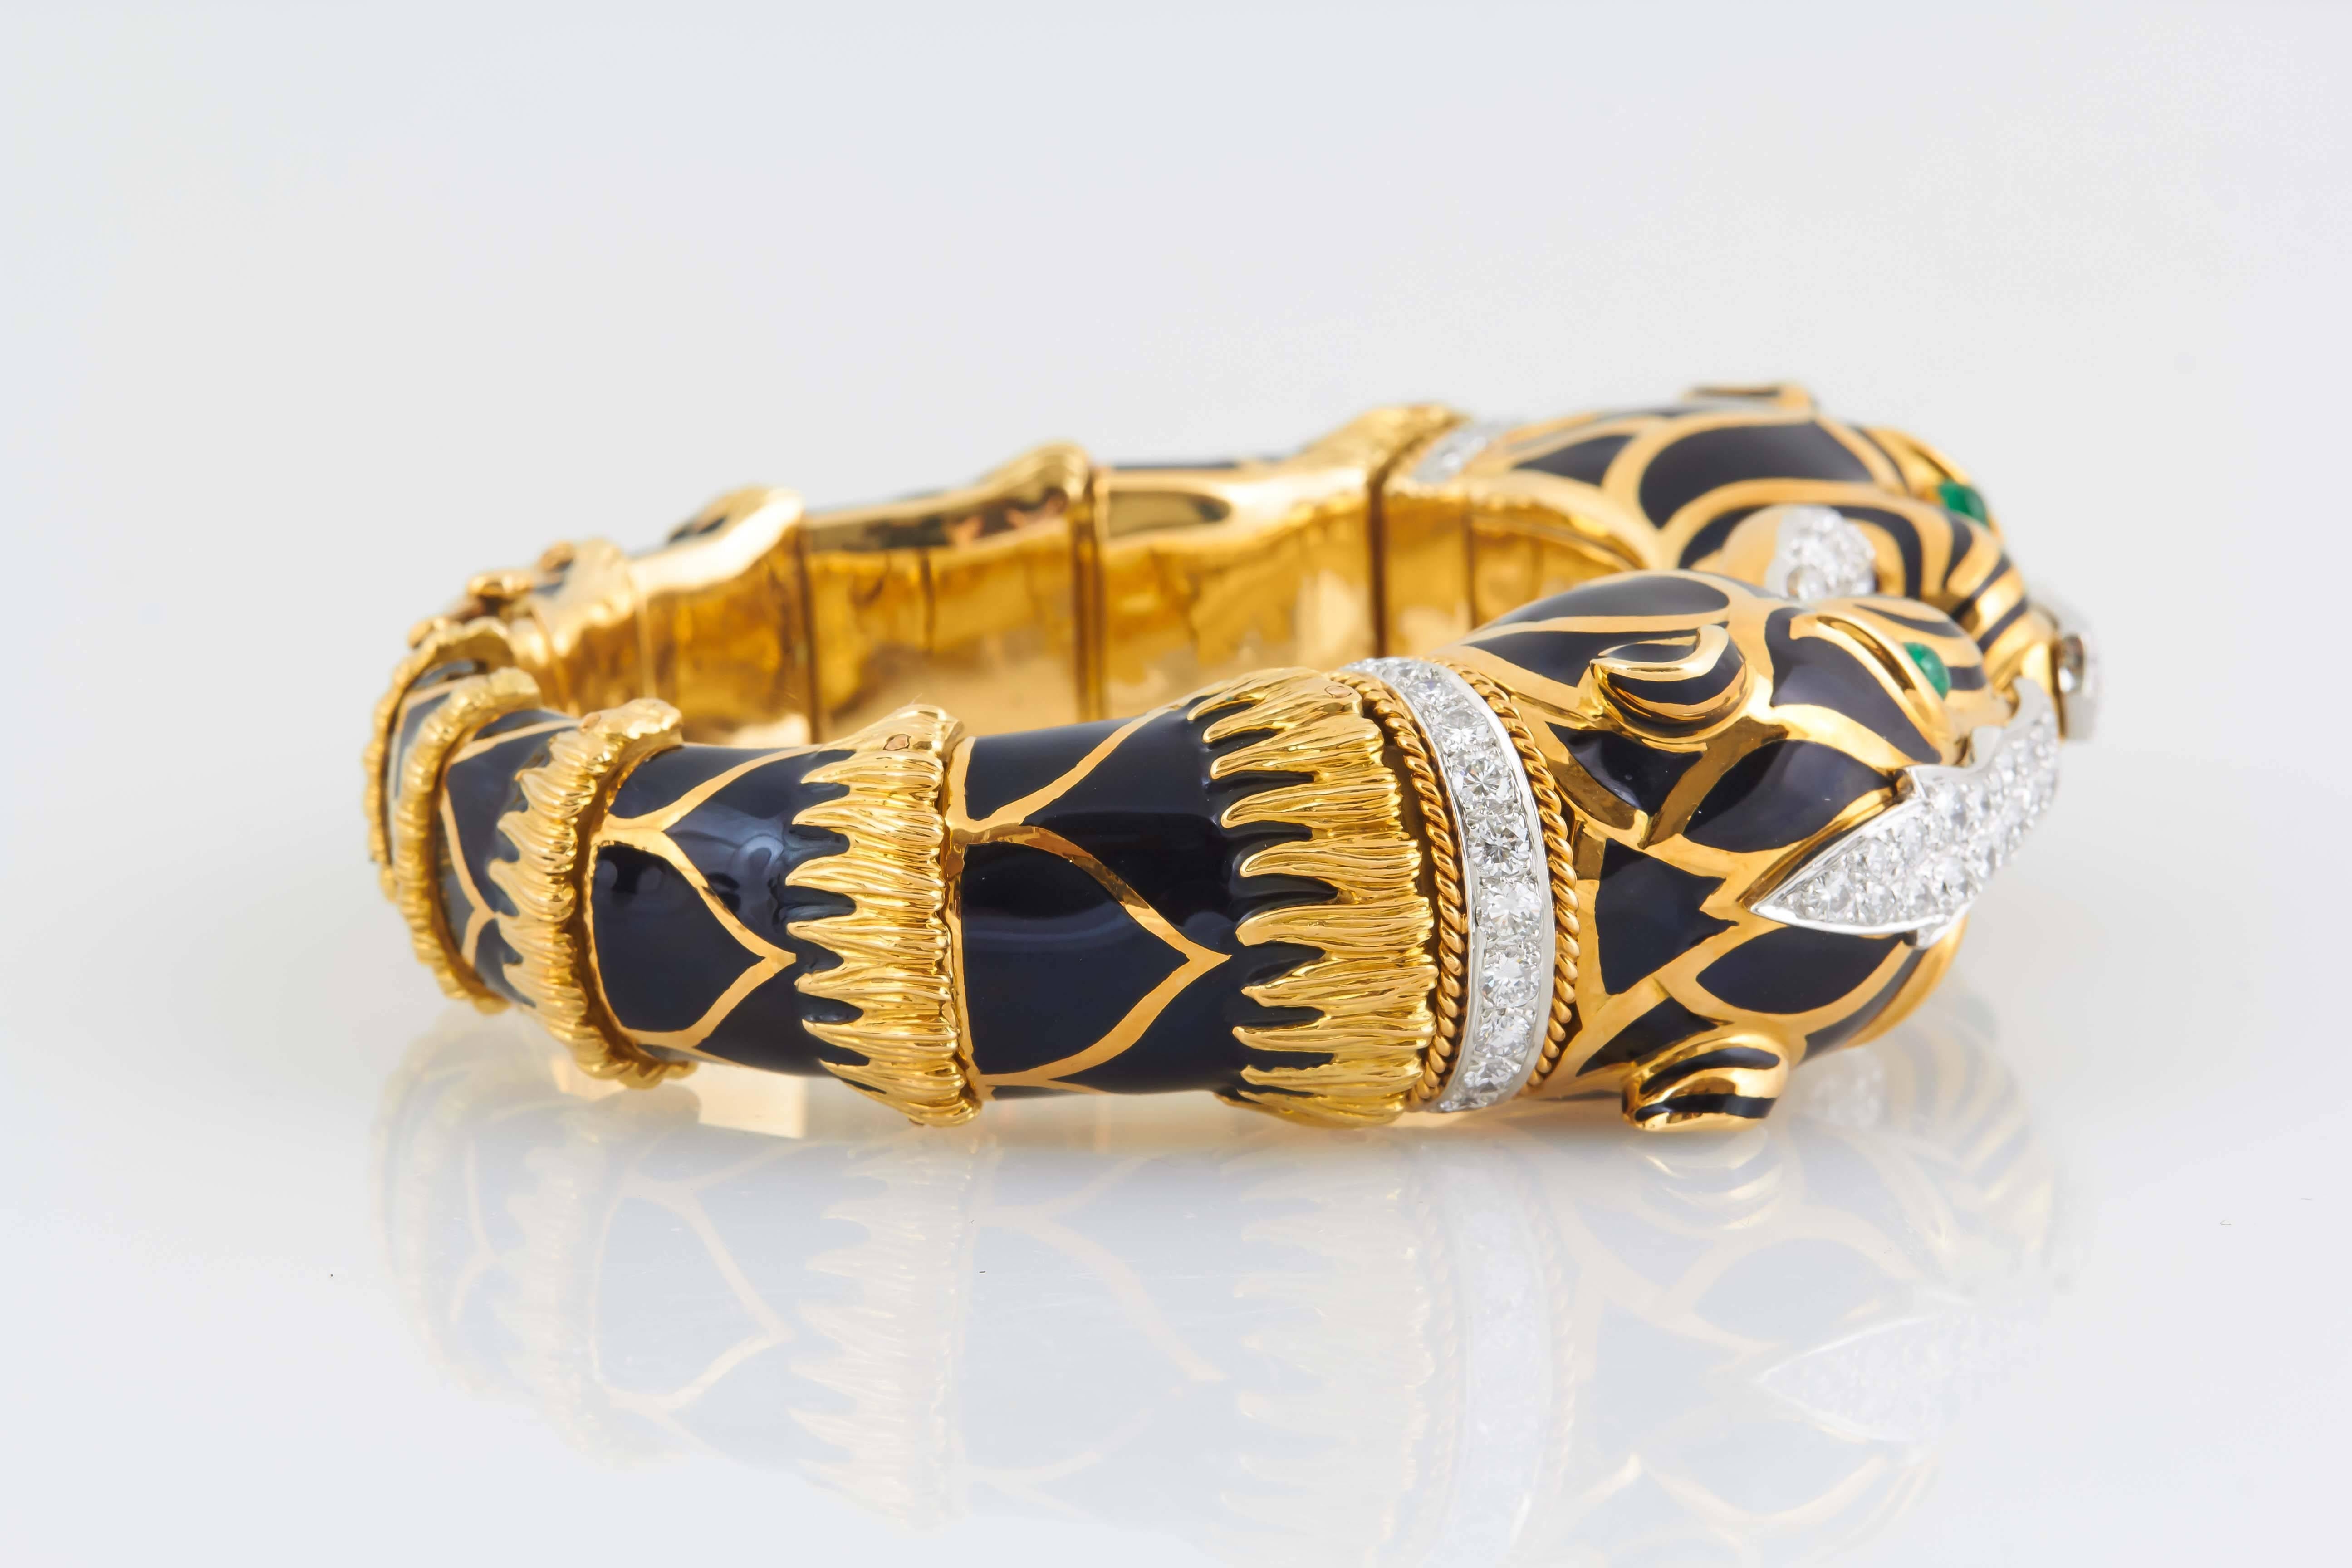 Black Tiger Bracelet finely crafted in 18k yellow gold with round brilliant cut diamonds and cabochon emeralds signed by DAVID WEBB.
Circa 1960's

